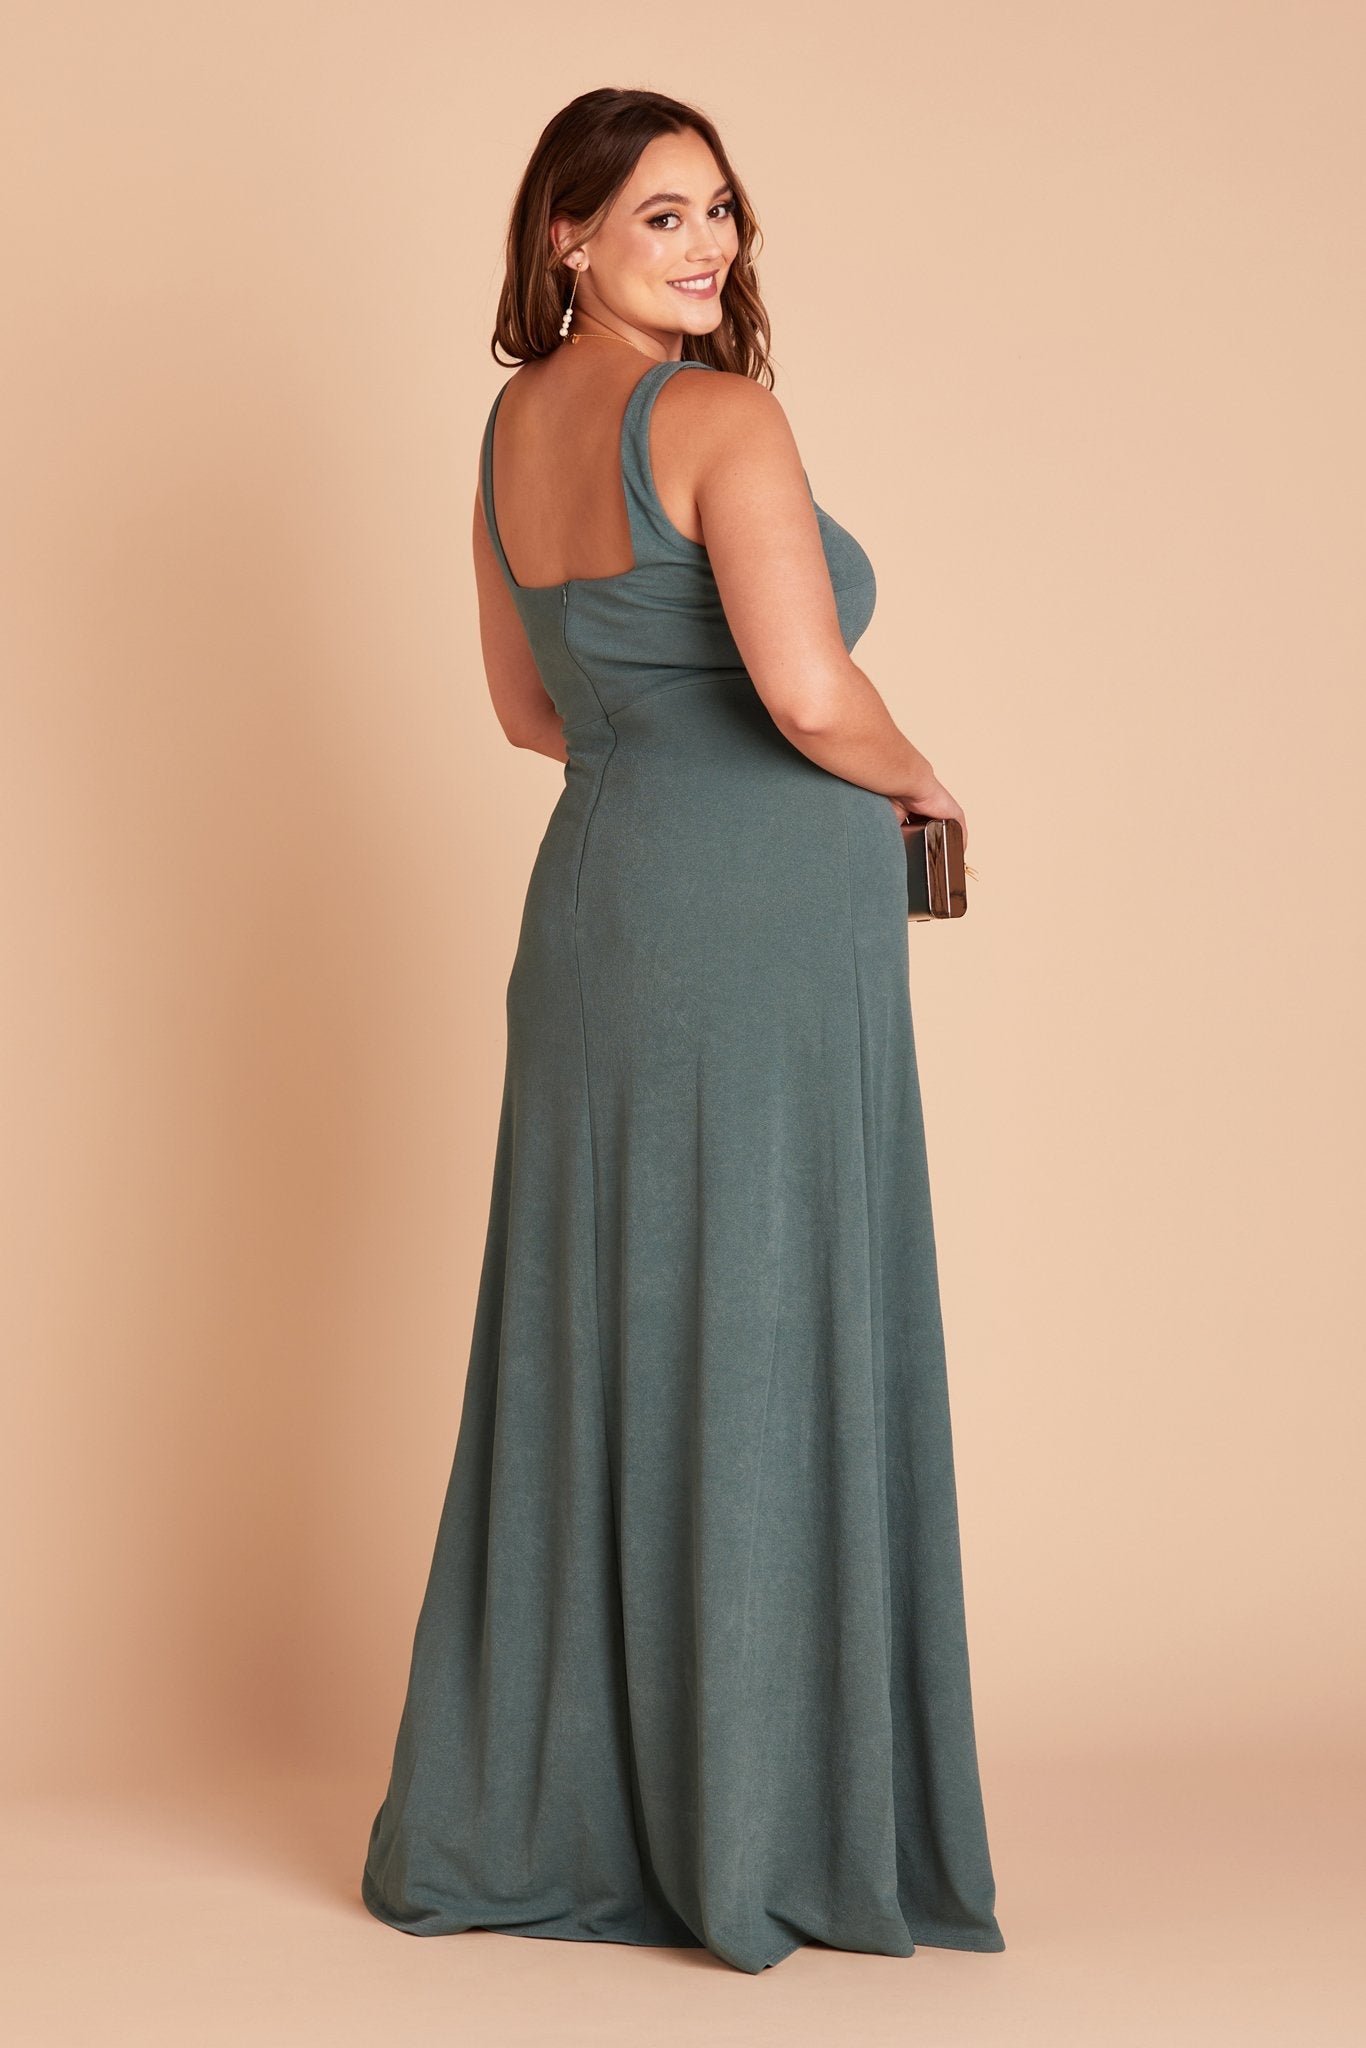 Alex convertible plus size bridesmaid dress with slit in sea glass green crepe by Birdy Grey, side view